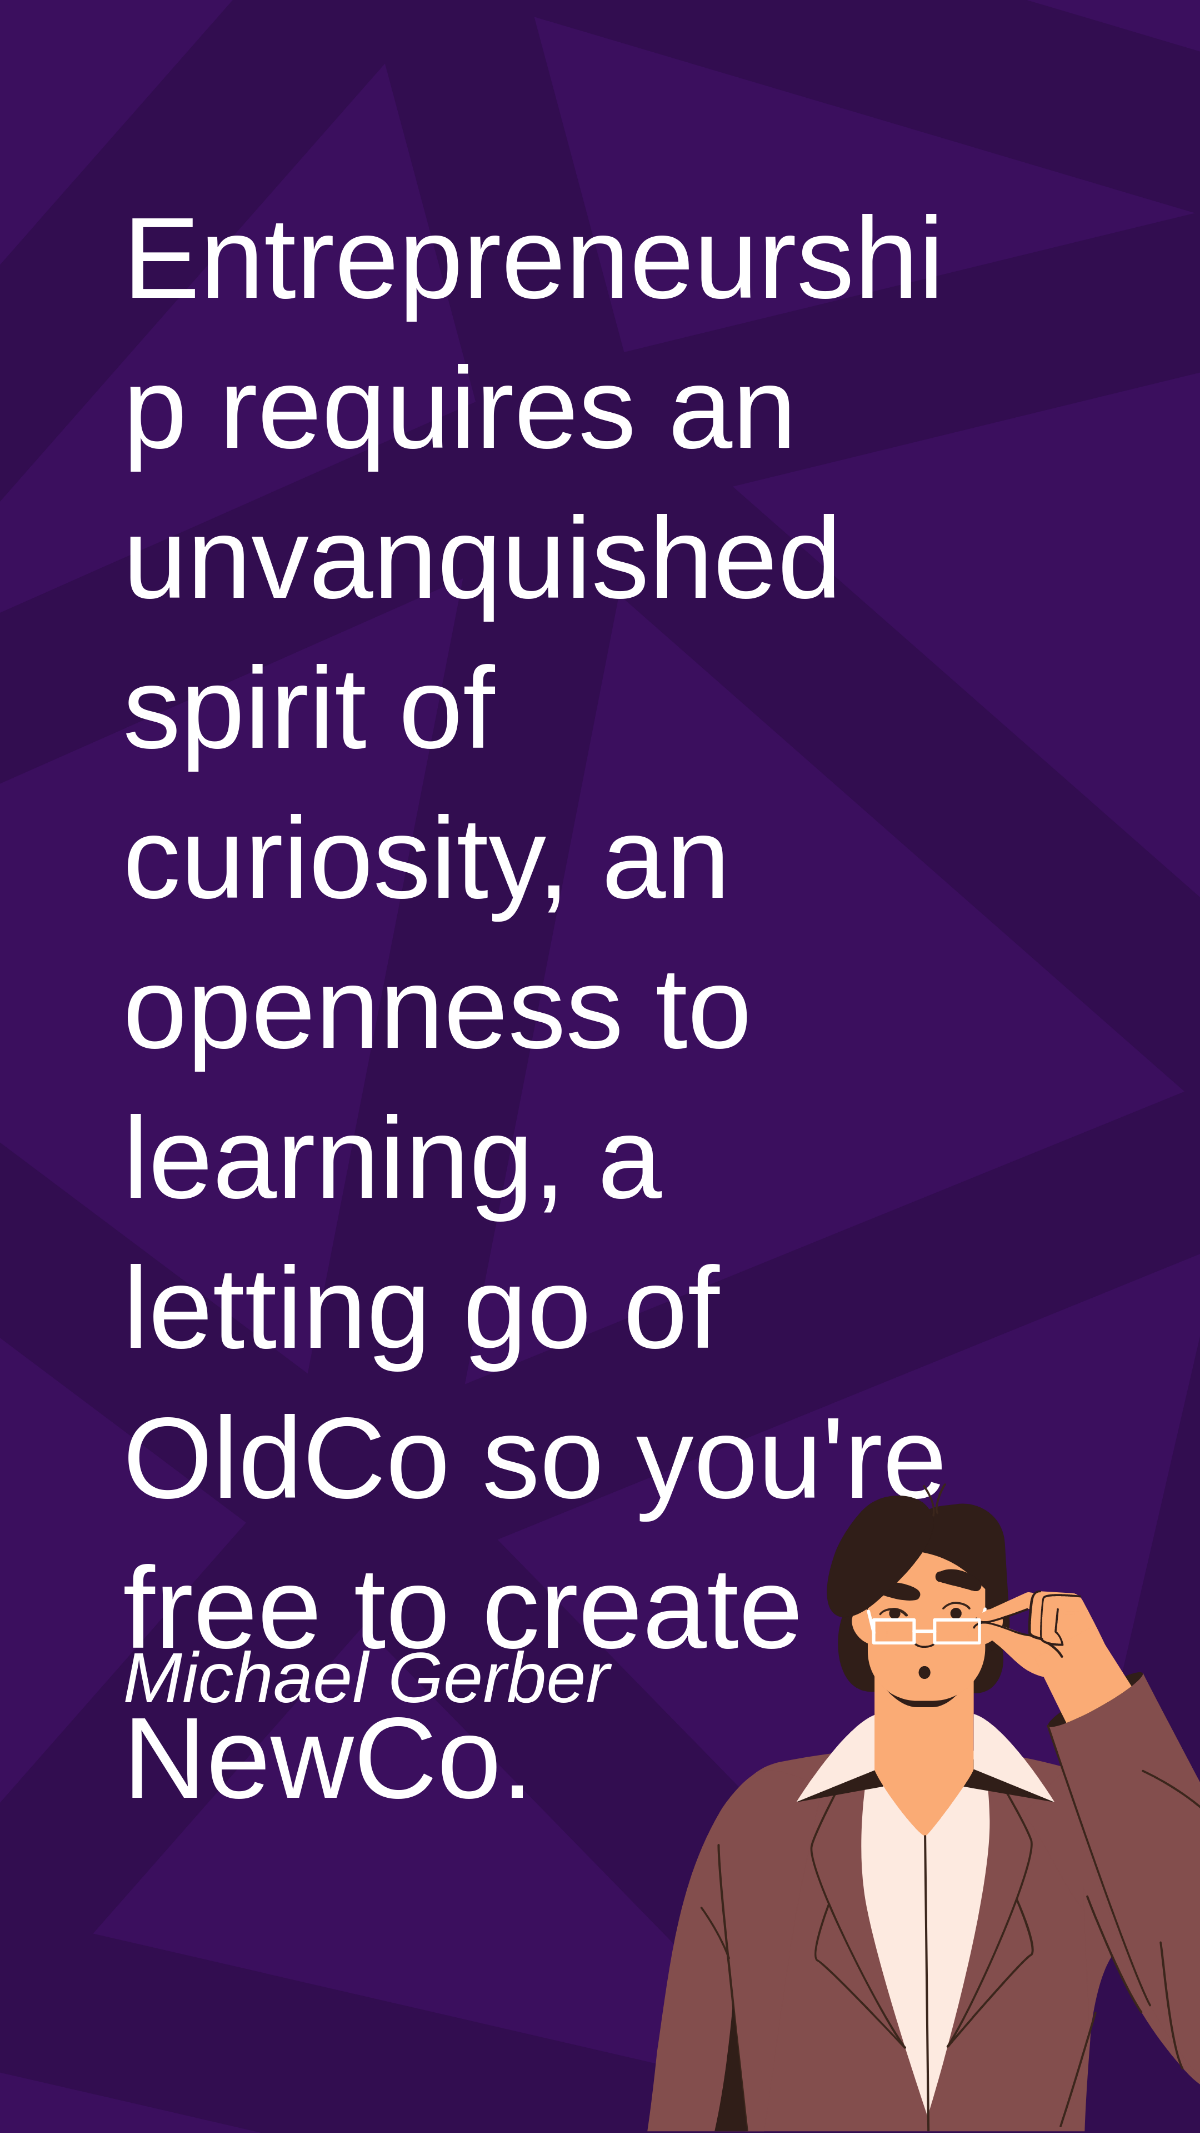 Free Michael Gerber - Entrepreneurship requires an unvanquished spirit of curiosity, an openness to learning, a letting go of OldCo so you're to create NewCo. Template